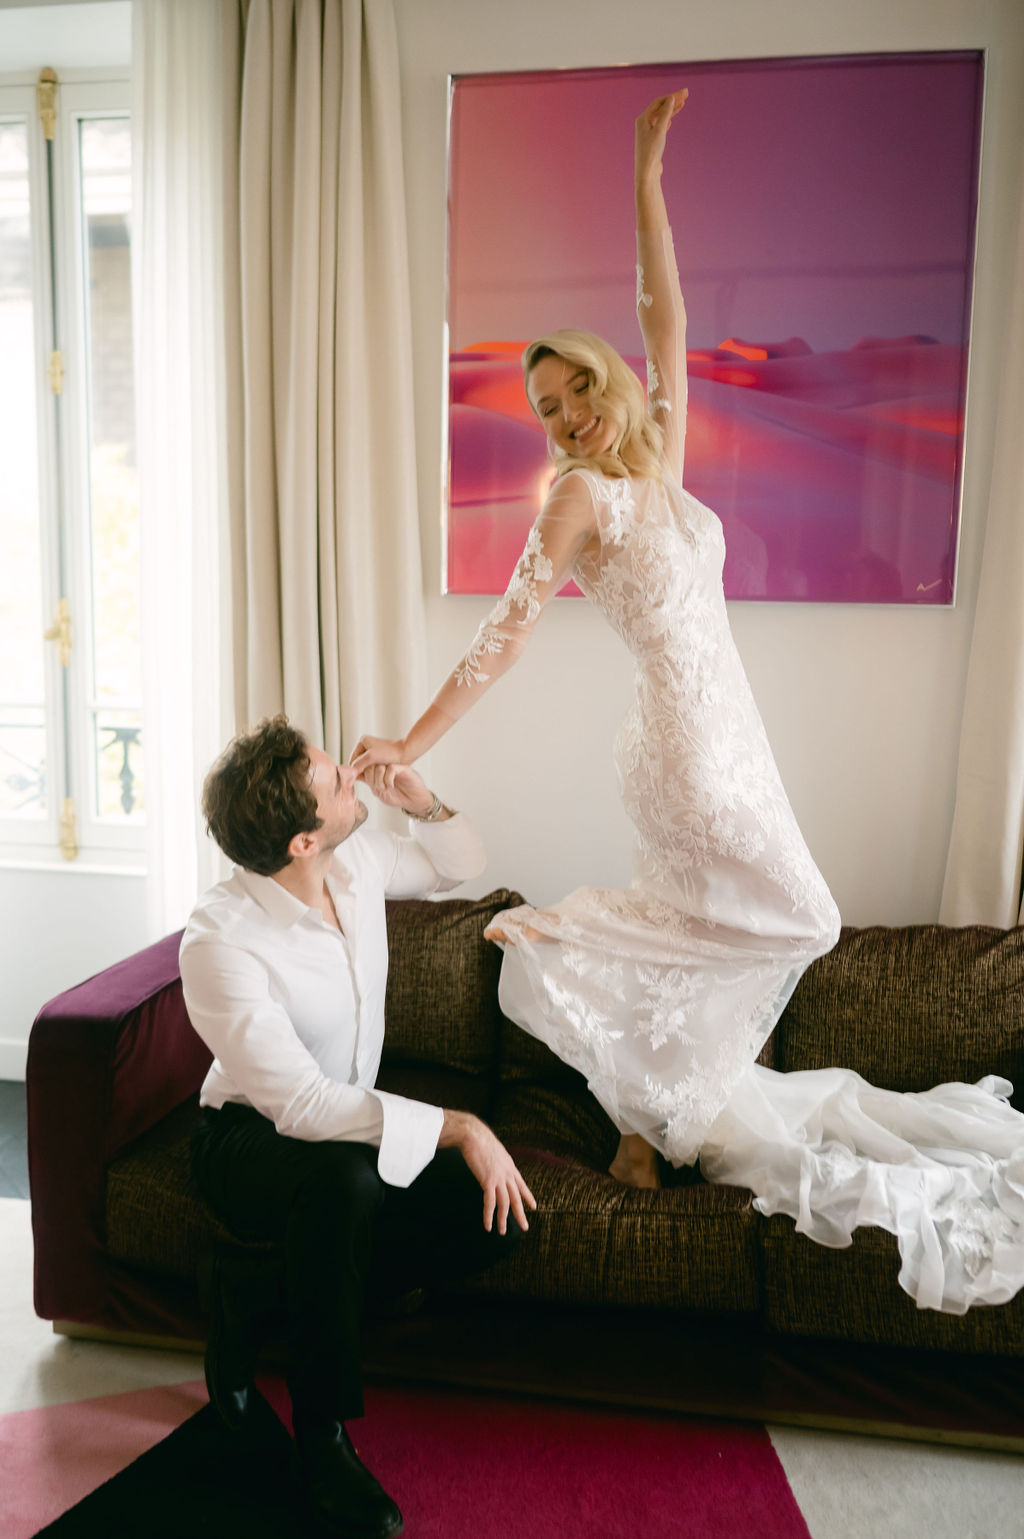 Bride dancing on couch in Paris hotel room 